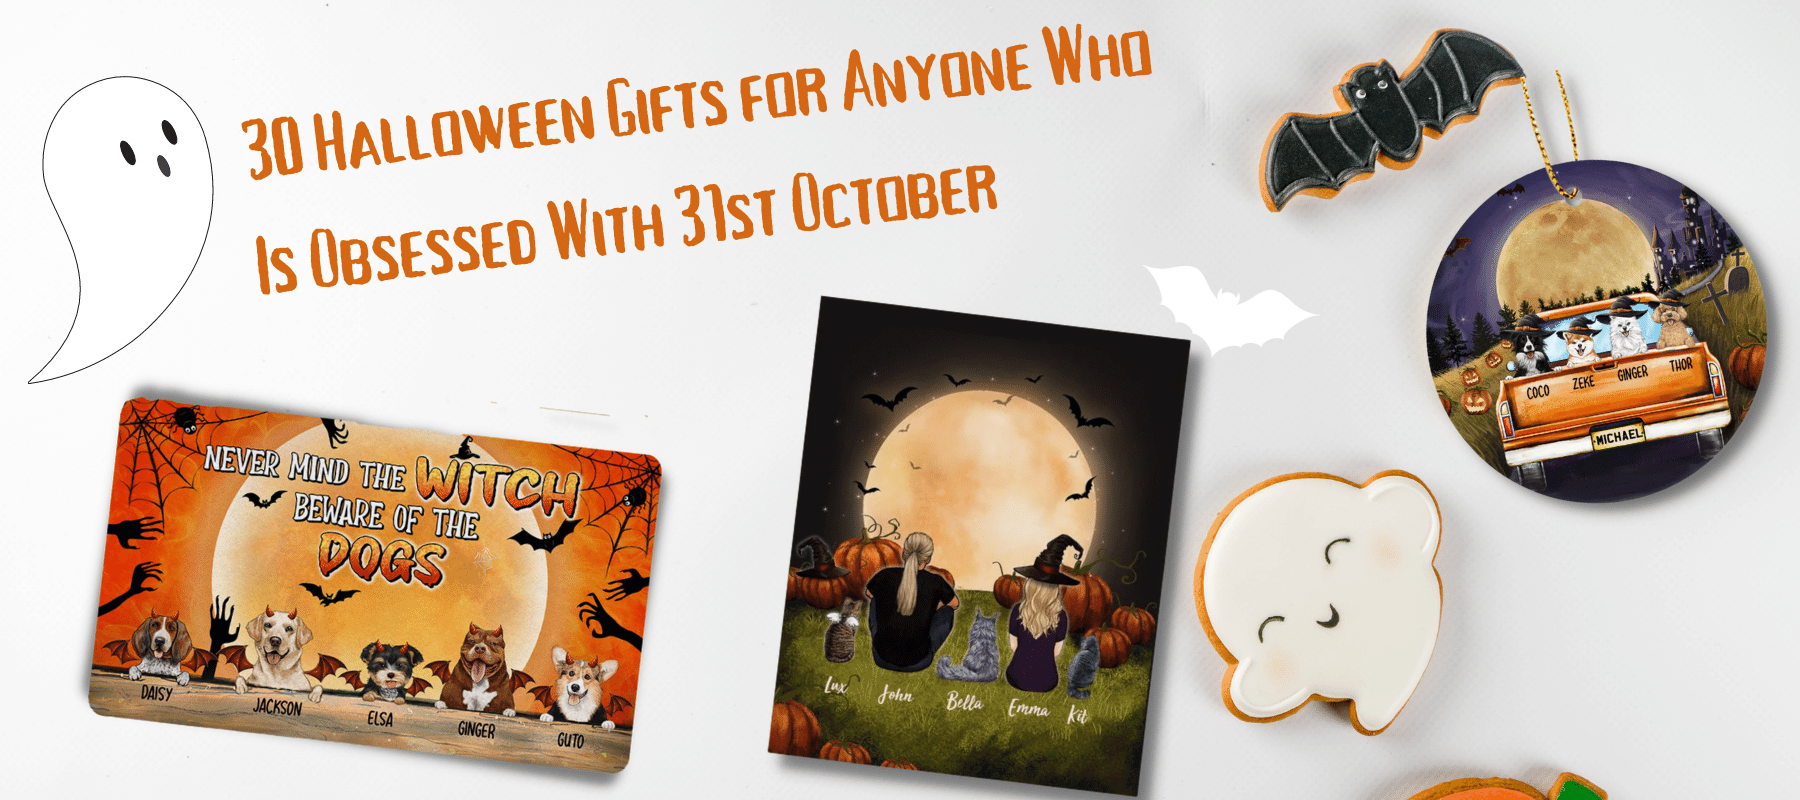 30 Halloween Gifts for Anyone Who Is Obsessed With 31st October